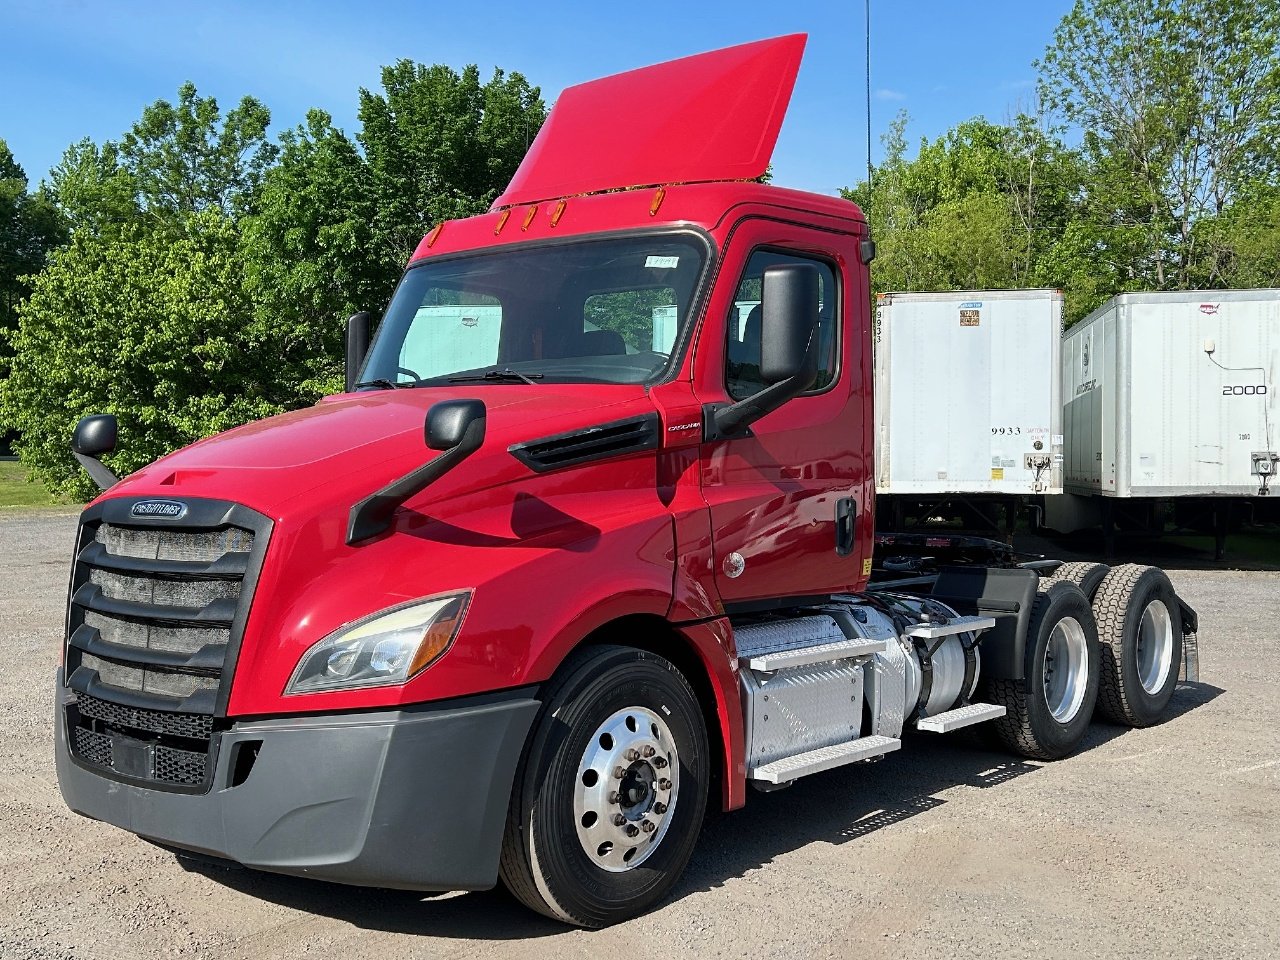 USED 2018 FREIGHTLINER CASCADIA TANDEM AXLE DAYCAB TRUCK #15259